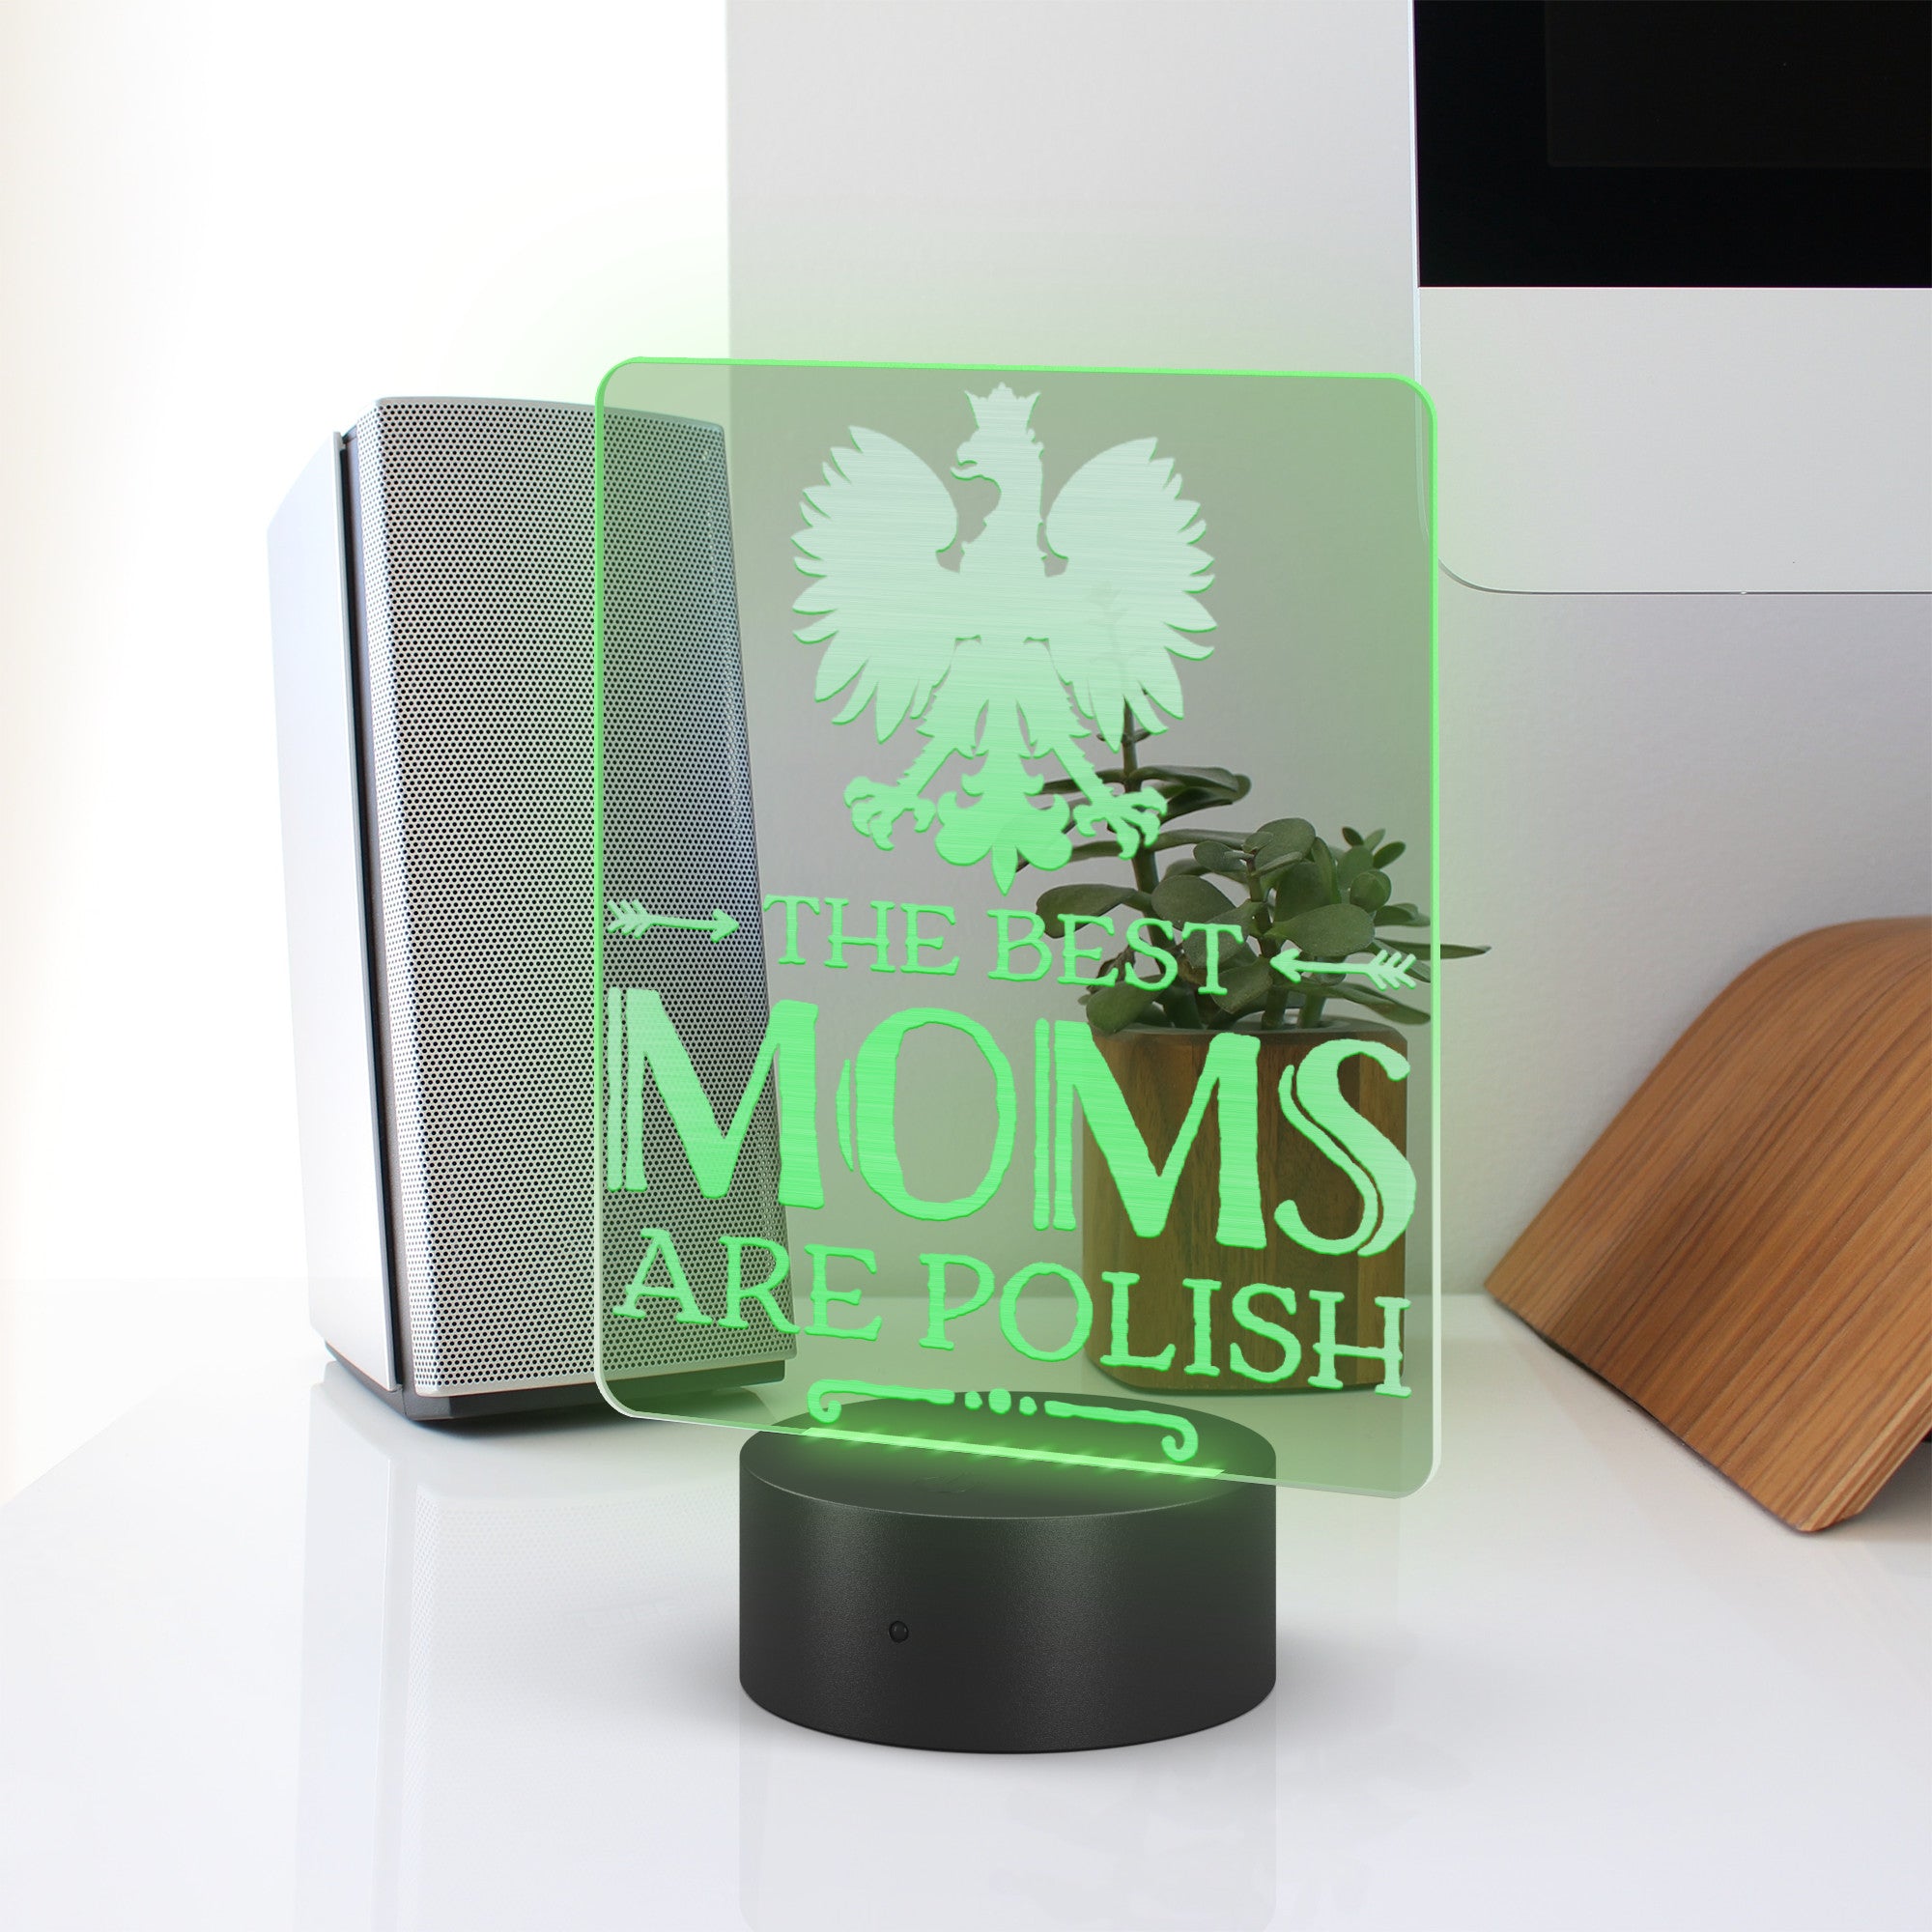 The Best Moms Are Polish Acrylic LED Sign LED Signs teelaunch   